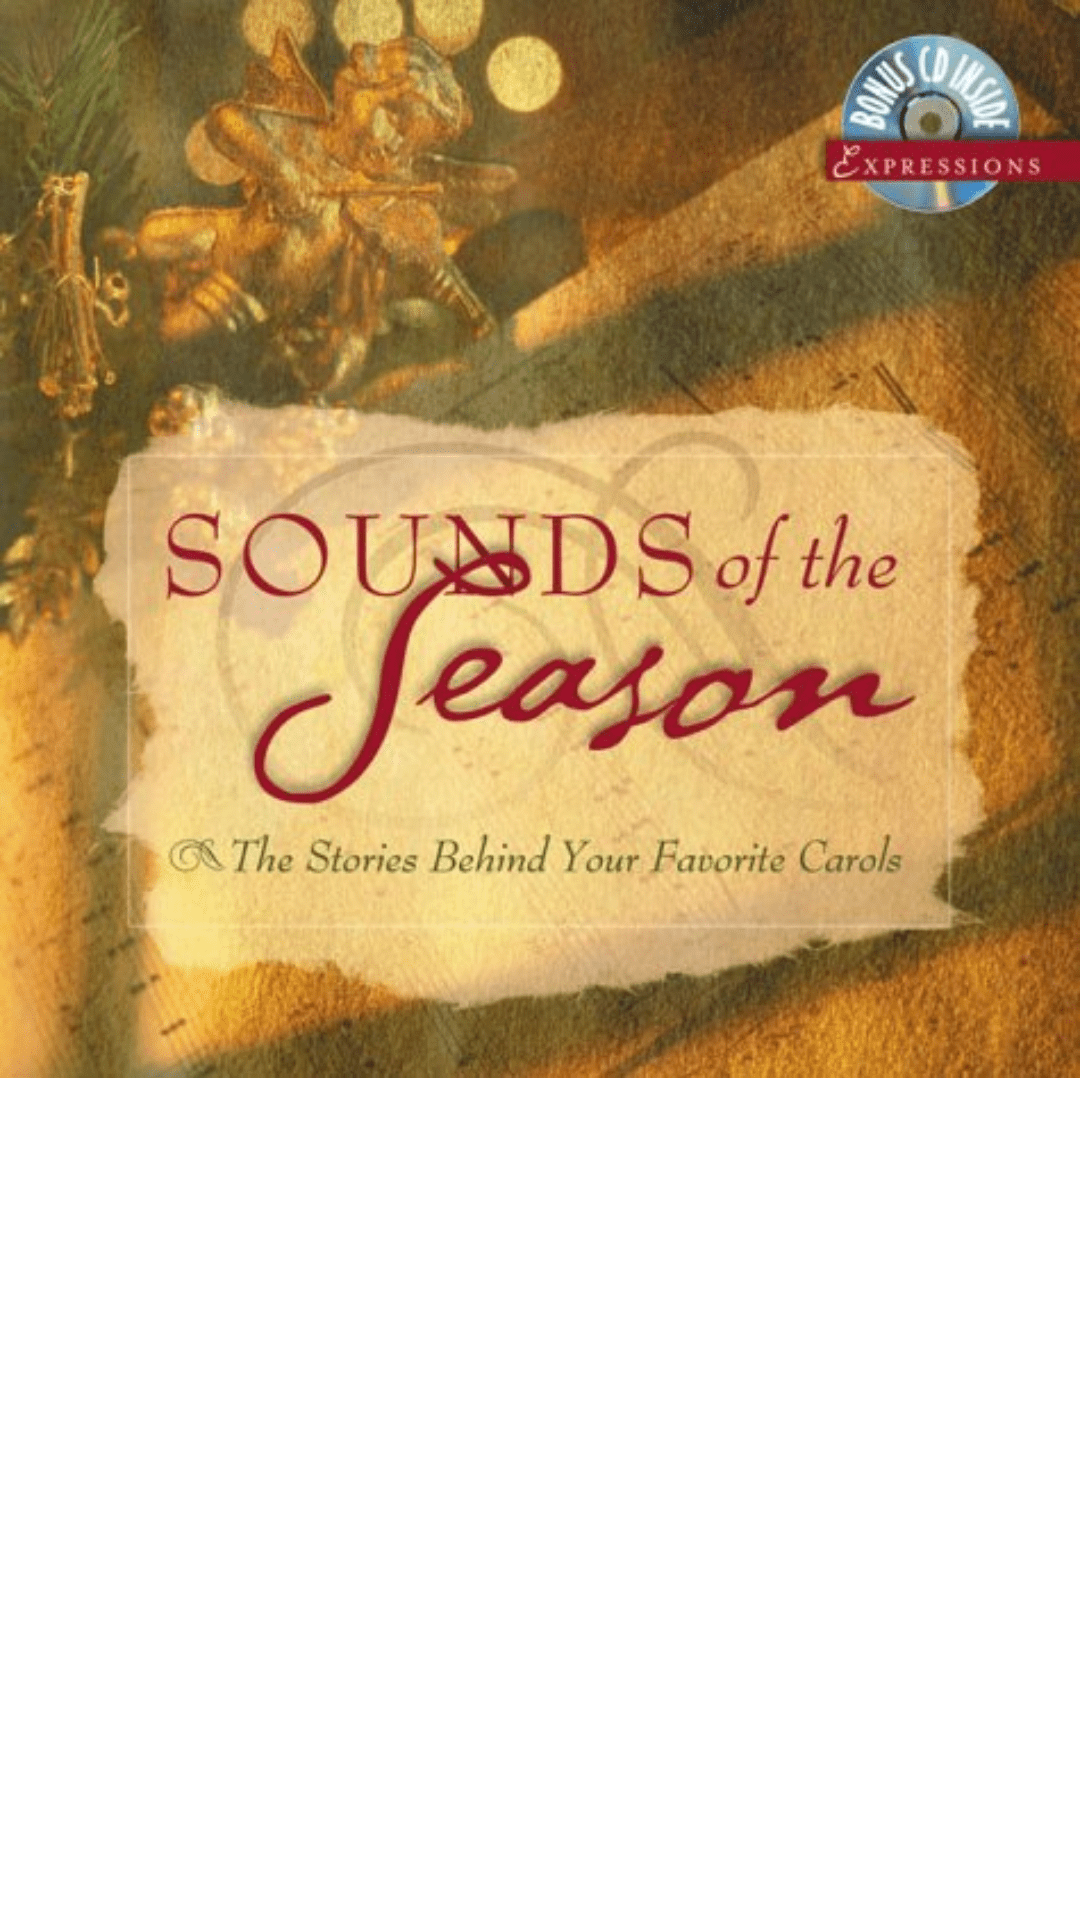 Sounds of the Season : The Stories Behind Your Favorite Carols